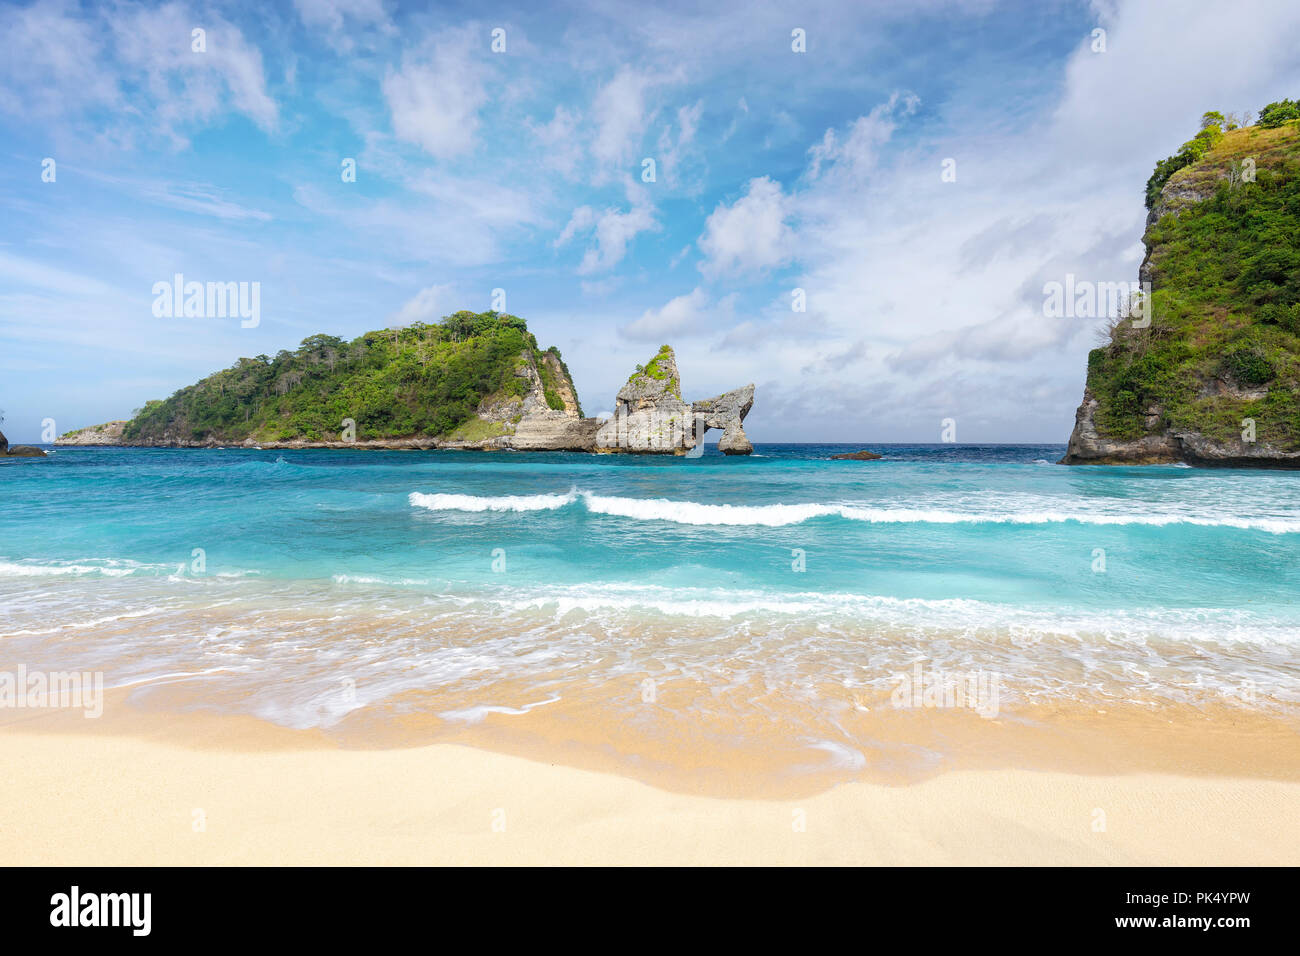 A beautiful view of Atuh Beach in Nusa Penida, a small island off of Bali. Stock Photo